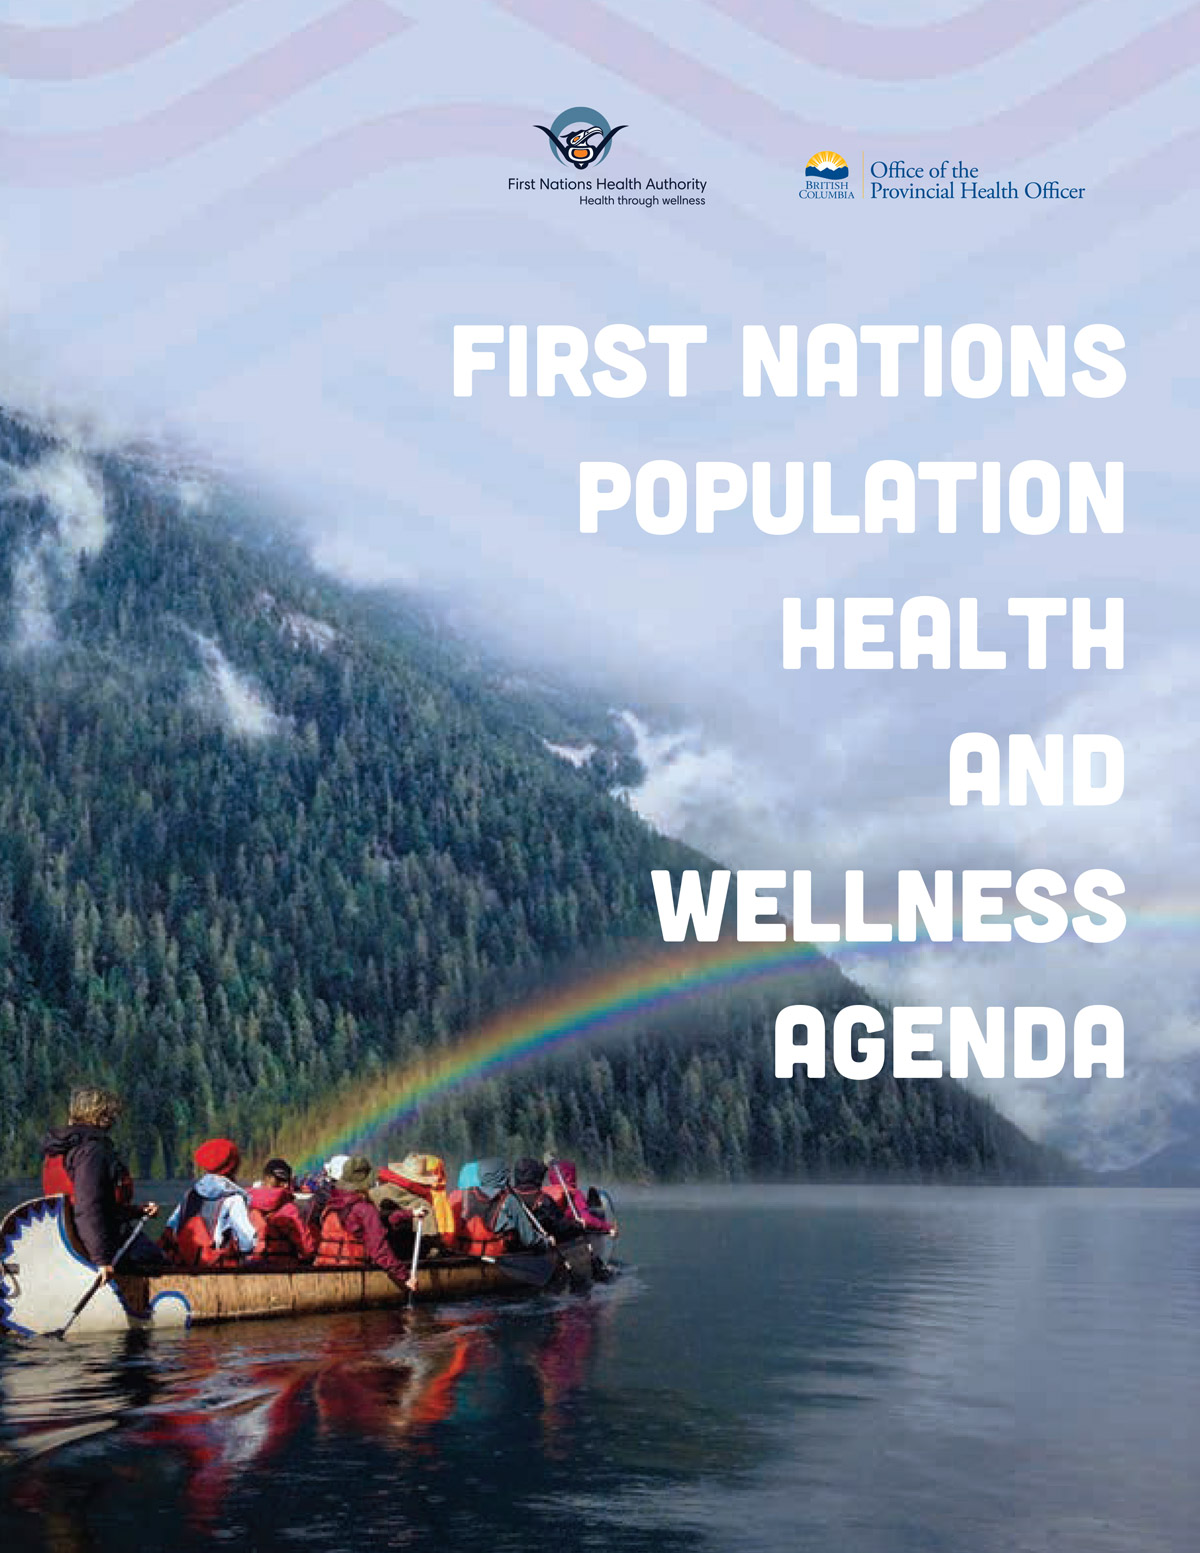 FNHA-PHO-First-Nations-Population-Health-and-Wellness-Agenda-Cover.jpg